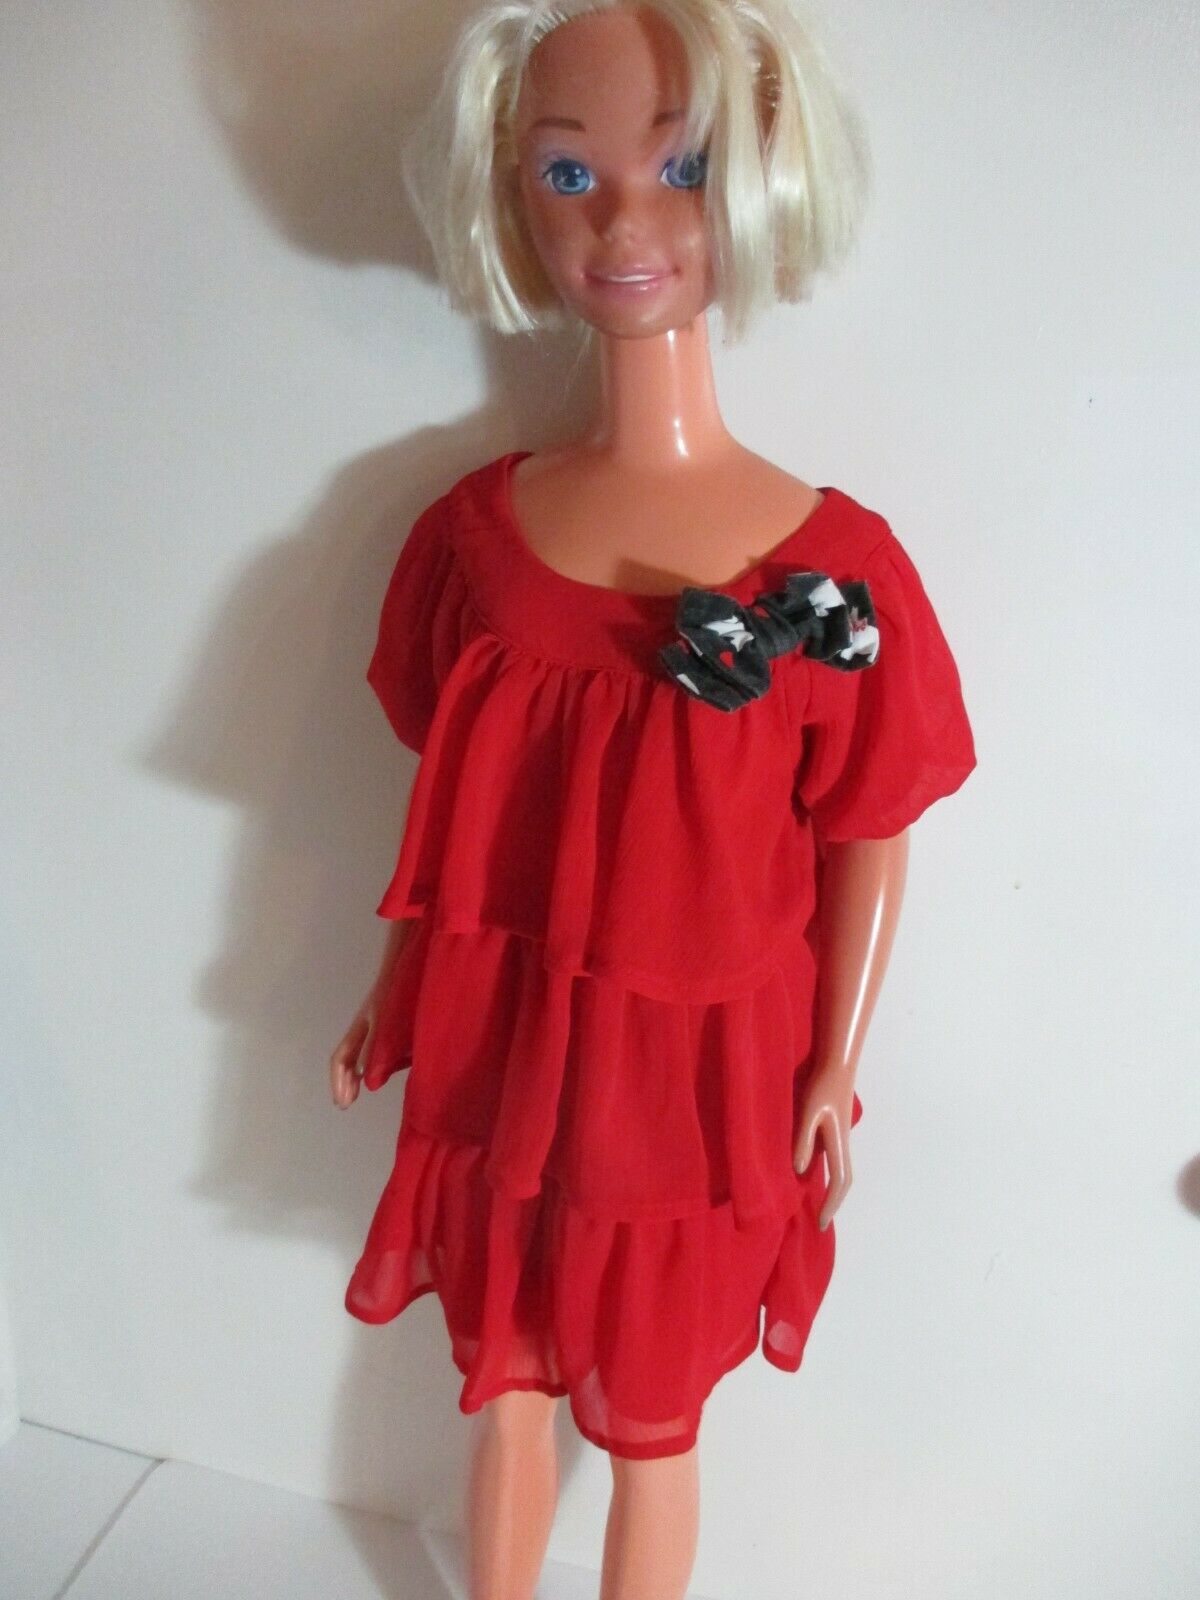 My Size Barbie 36" Doll Dress Red  Ruffles Short Sleeves Black Bow Clothing